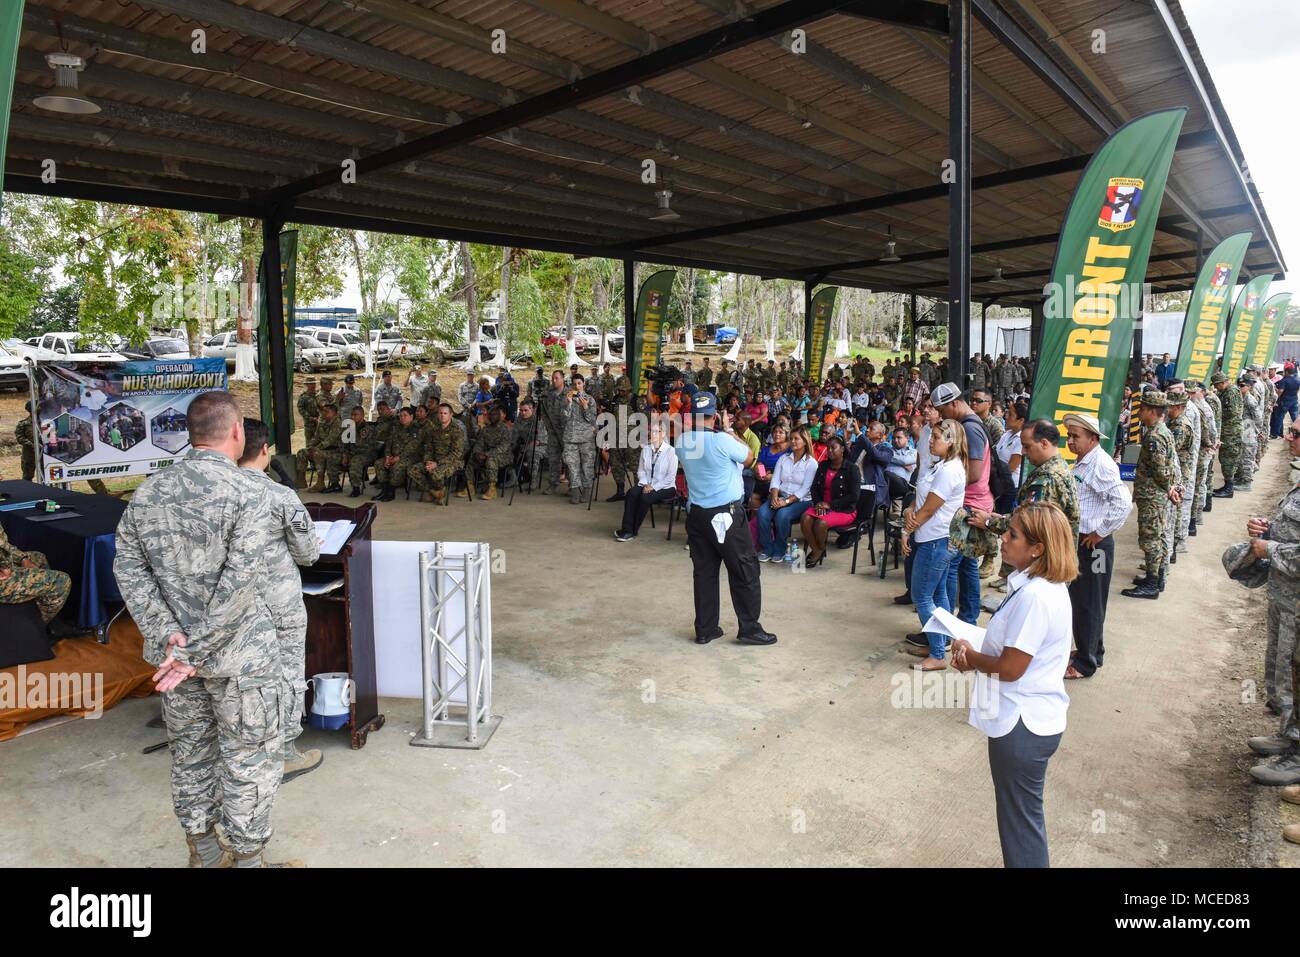 Guests attending the opening ceremony of Exercise New Horizons 2018 listen to speakers, April 11, 2018, in Meteti, Panama. During the exercise, U.S. military members will build three schools, one community center and on women’s health ward. They will also provide medical aid to people in the Darien, Darien, Coclé and Veraguas Provinces. During the exercise, U.S. military members will build three schools, one community center and a women’s health ward in the Meteti area. They will also work closely with Panamanian health providers bringing medical aid to people in the Darien, Coclé, and Veragua Stock Photo